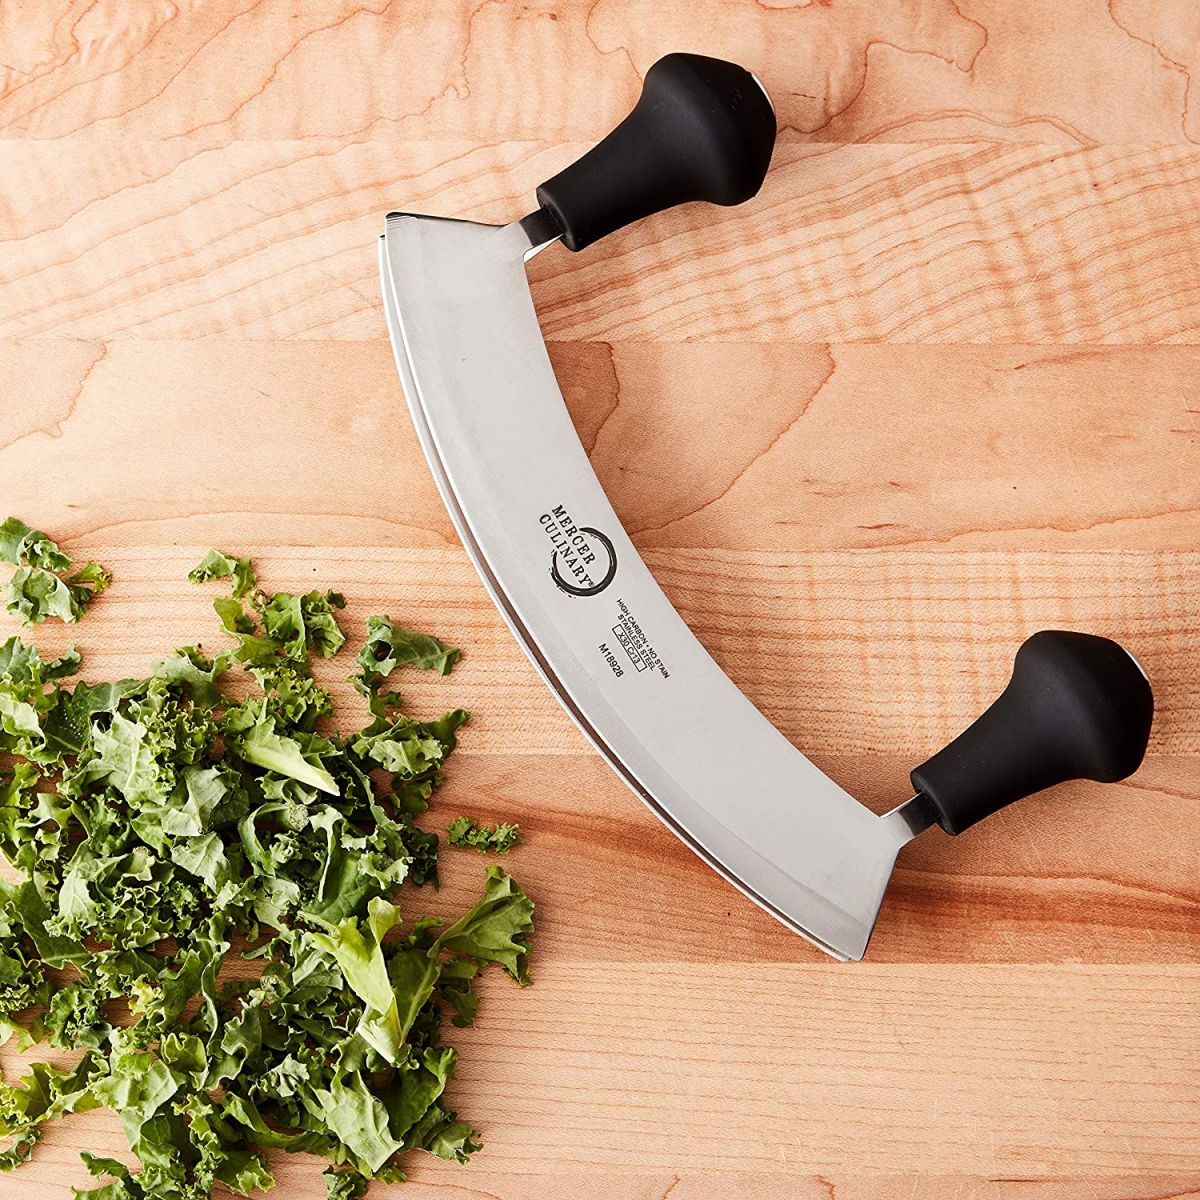 This image shows the Mercer 8" Double Blade Mezzaluna Herb Cutter laying next to the freshly chopped Parsley